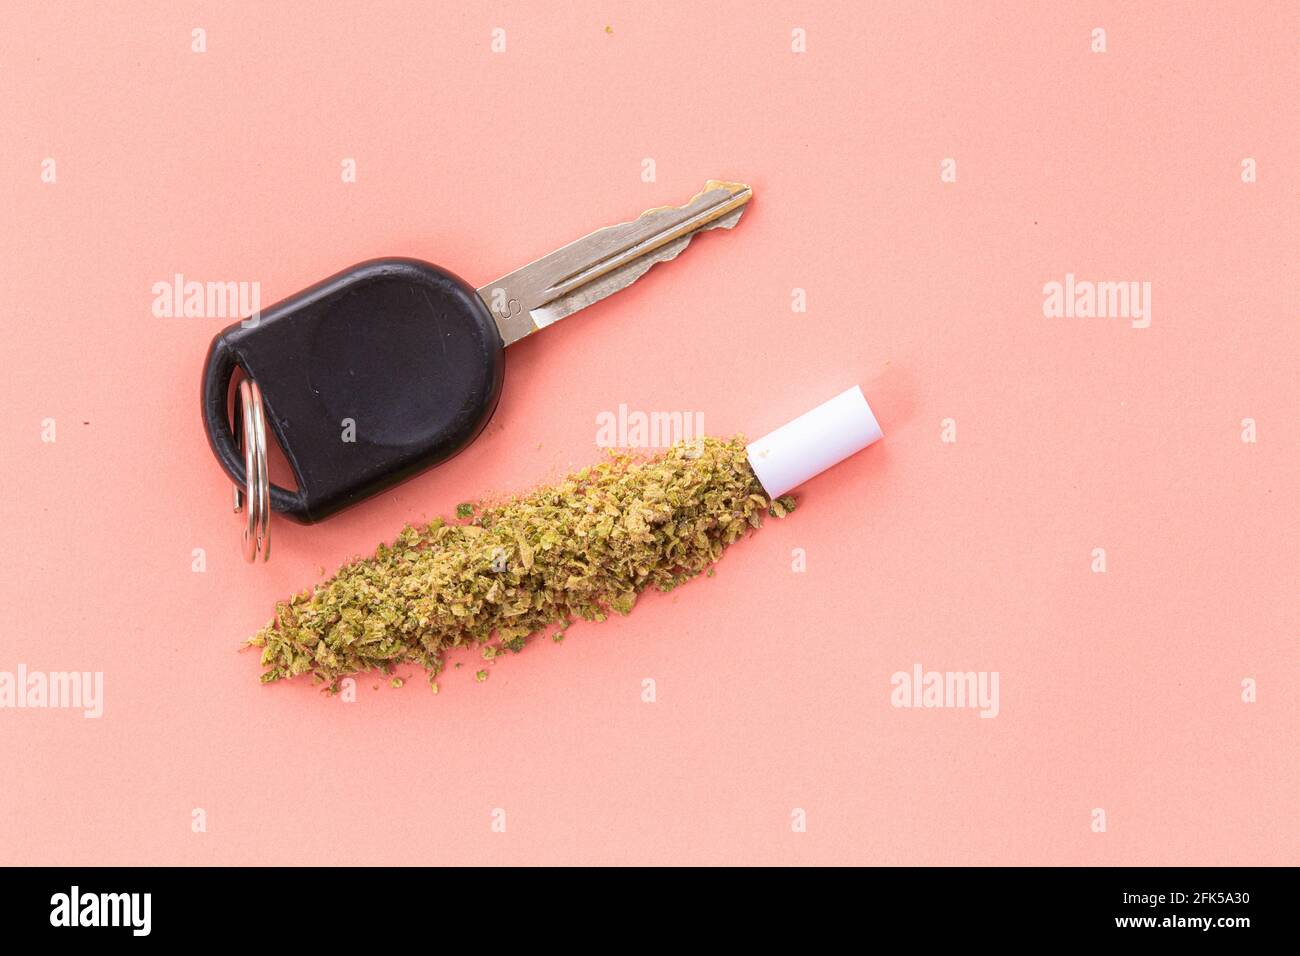 driving under the influence of cannabis or marijuana, high driving, driving while impaired, car key with cannabis Stock Photo